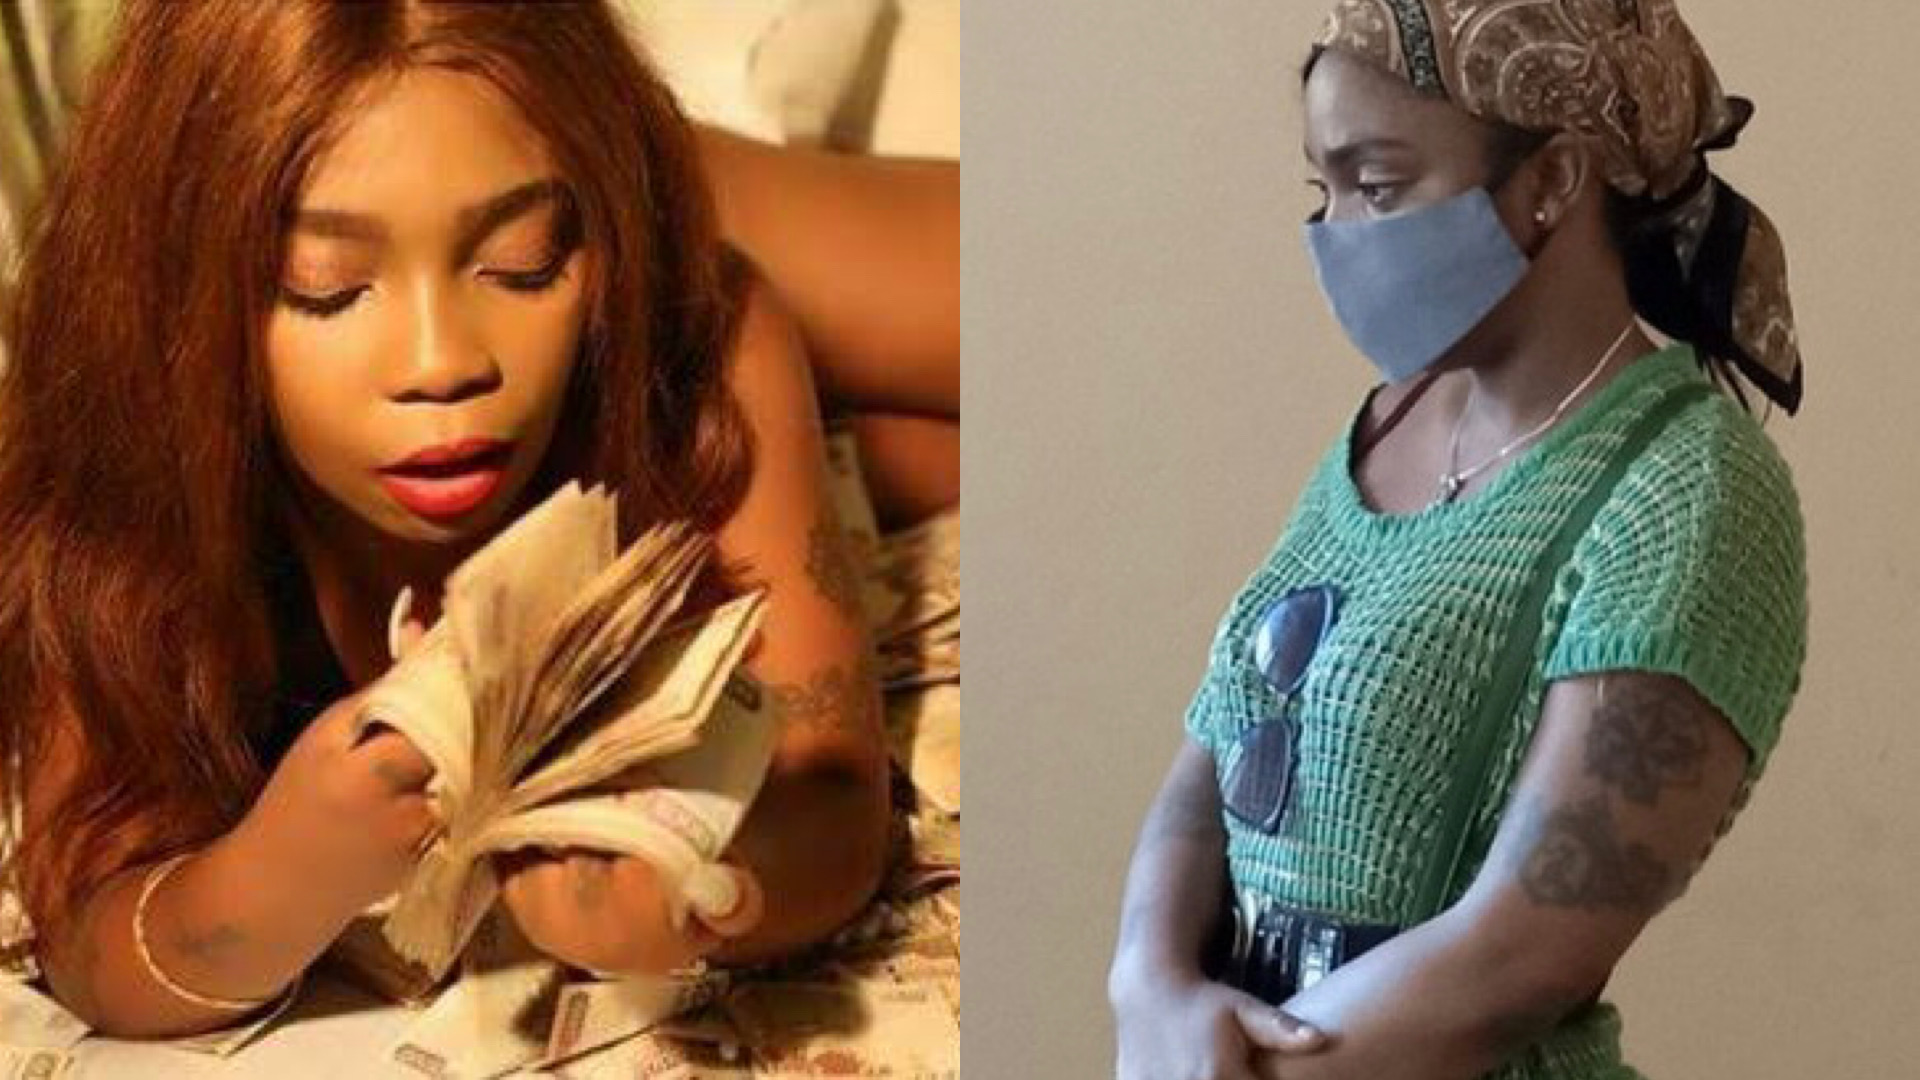 Boogie not so boogie Socialite Pendo arraigned in court over unpaid hotel bill after client abandons her